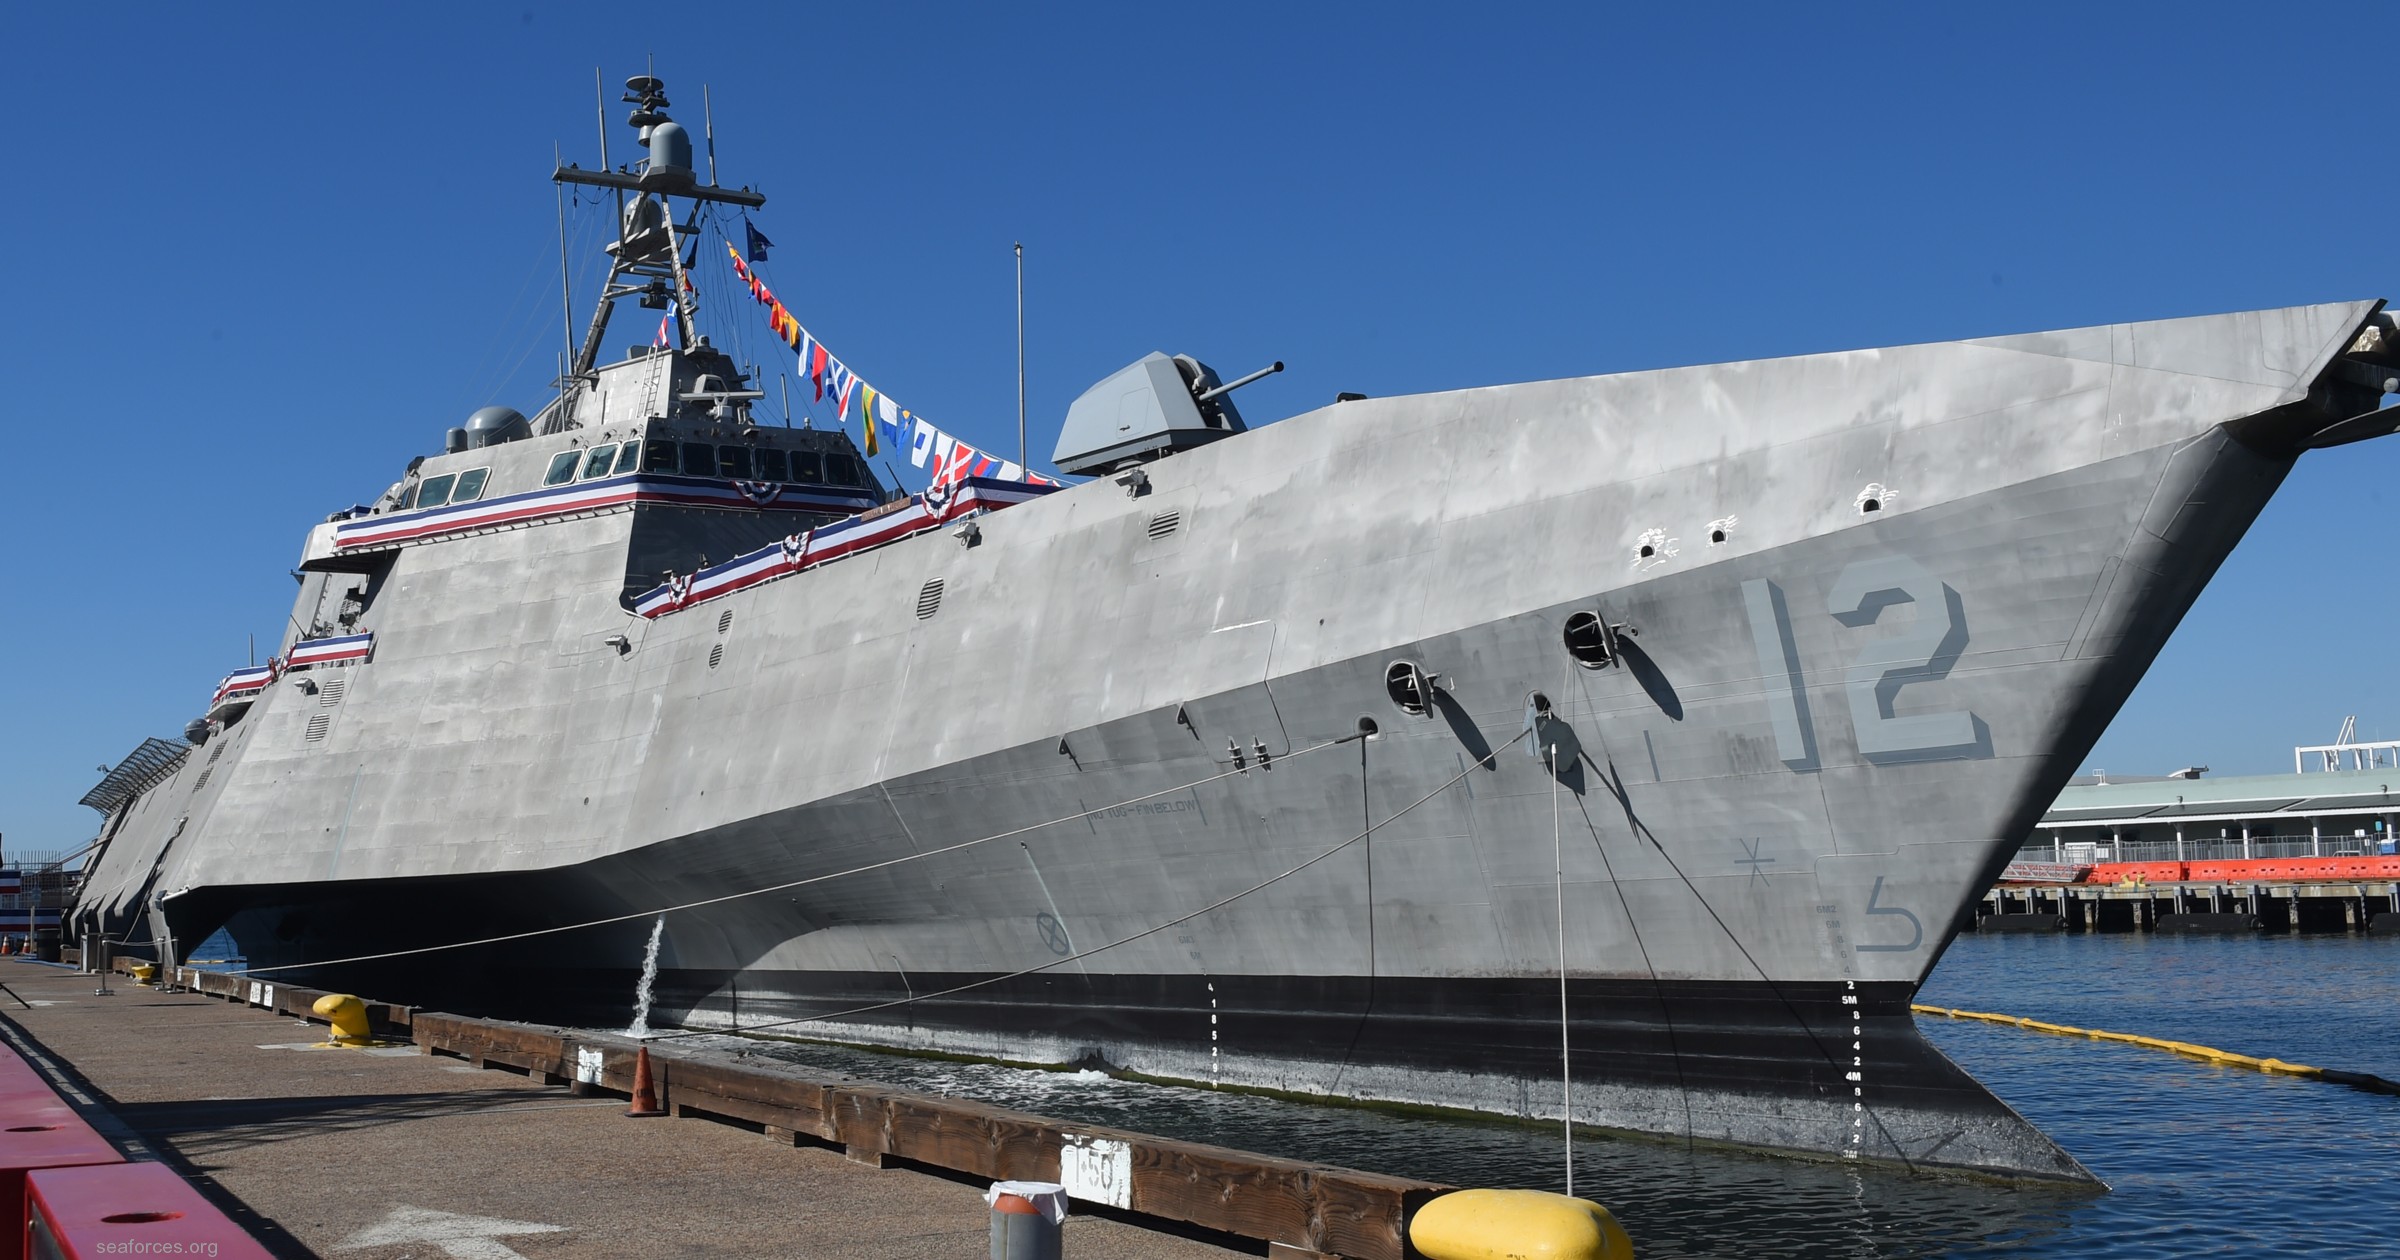 lcs-12 uss omaha independence class littoral combat ship us navy 05 commissioning ceremony san diego